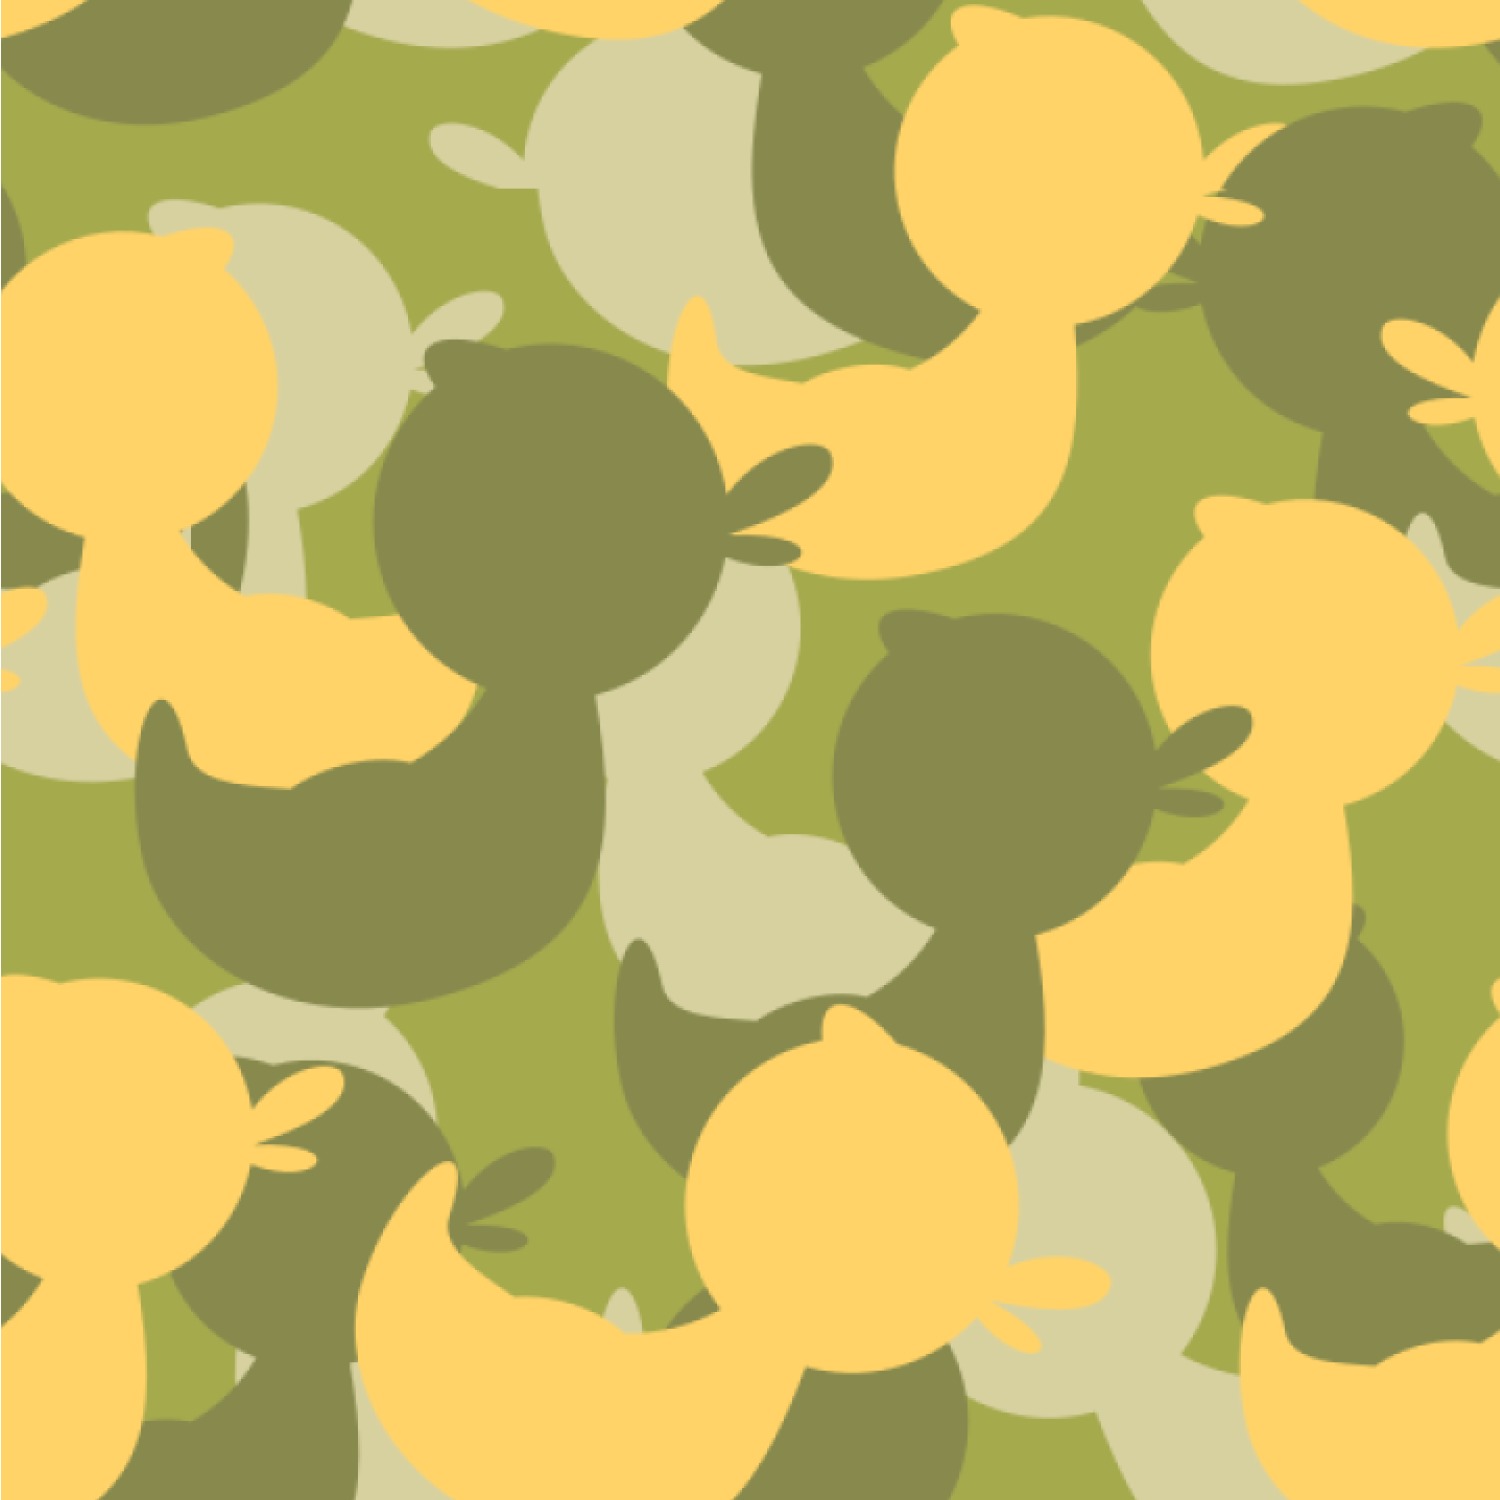 Military Camouflage , HD Wallpaper & Backgrounds